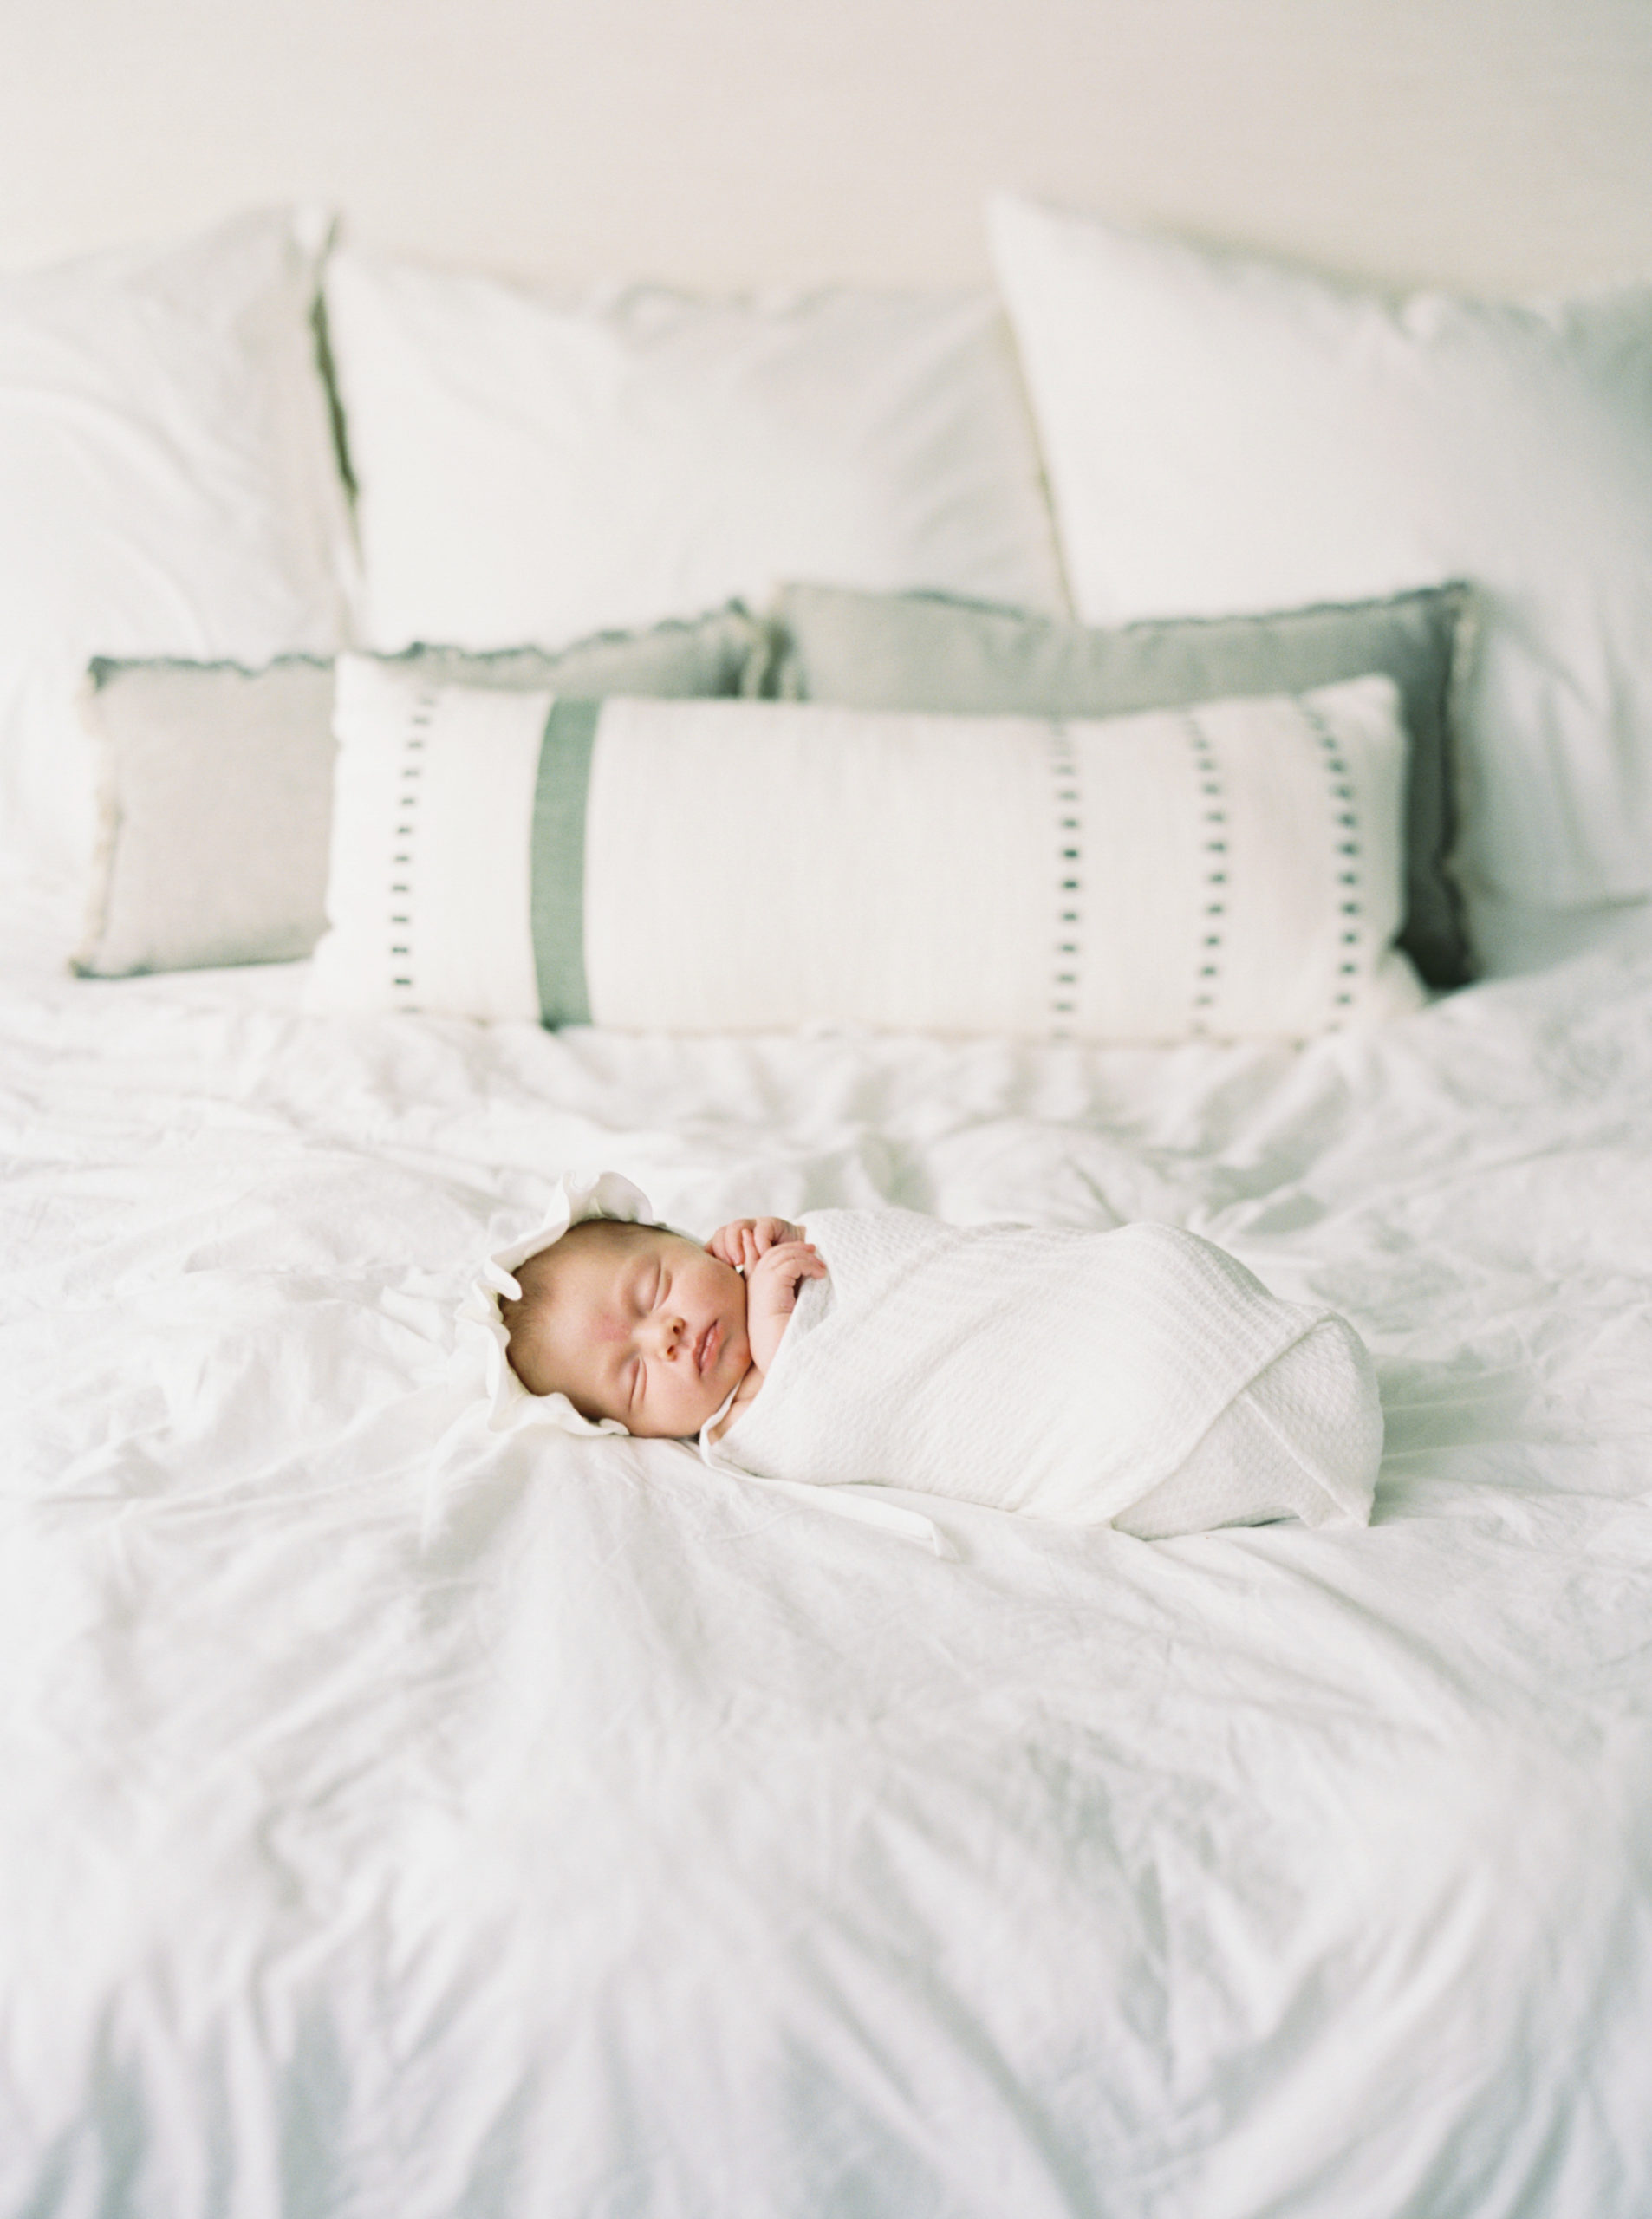 Baby napping in a beautiful, bright, Milwaukee bedroom